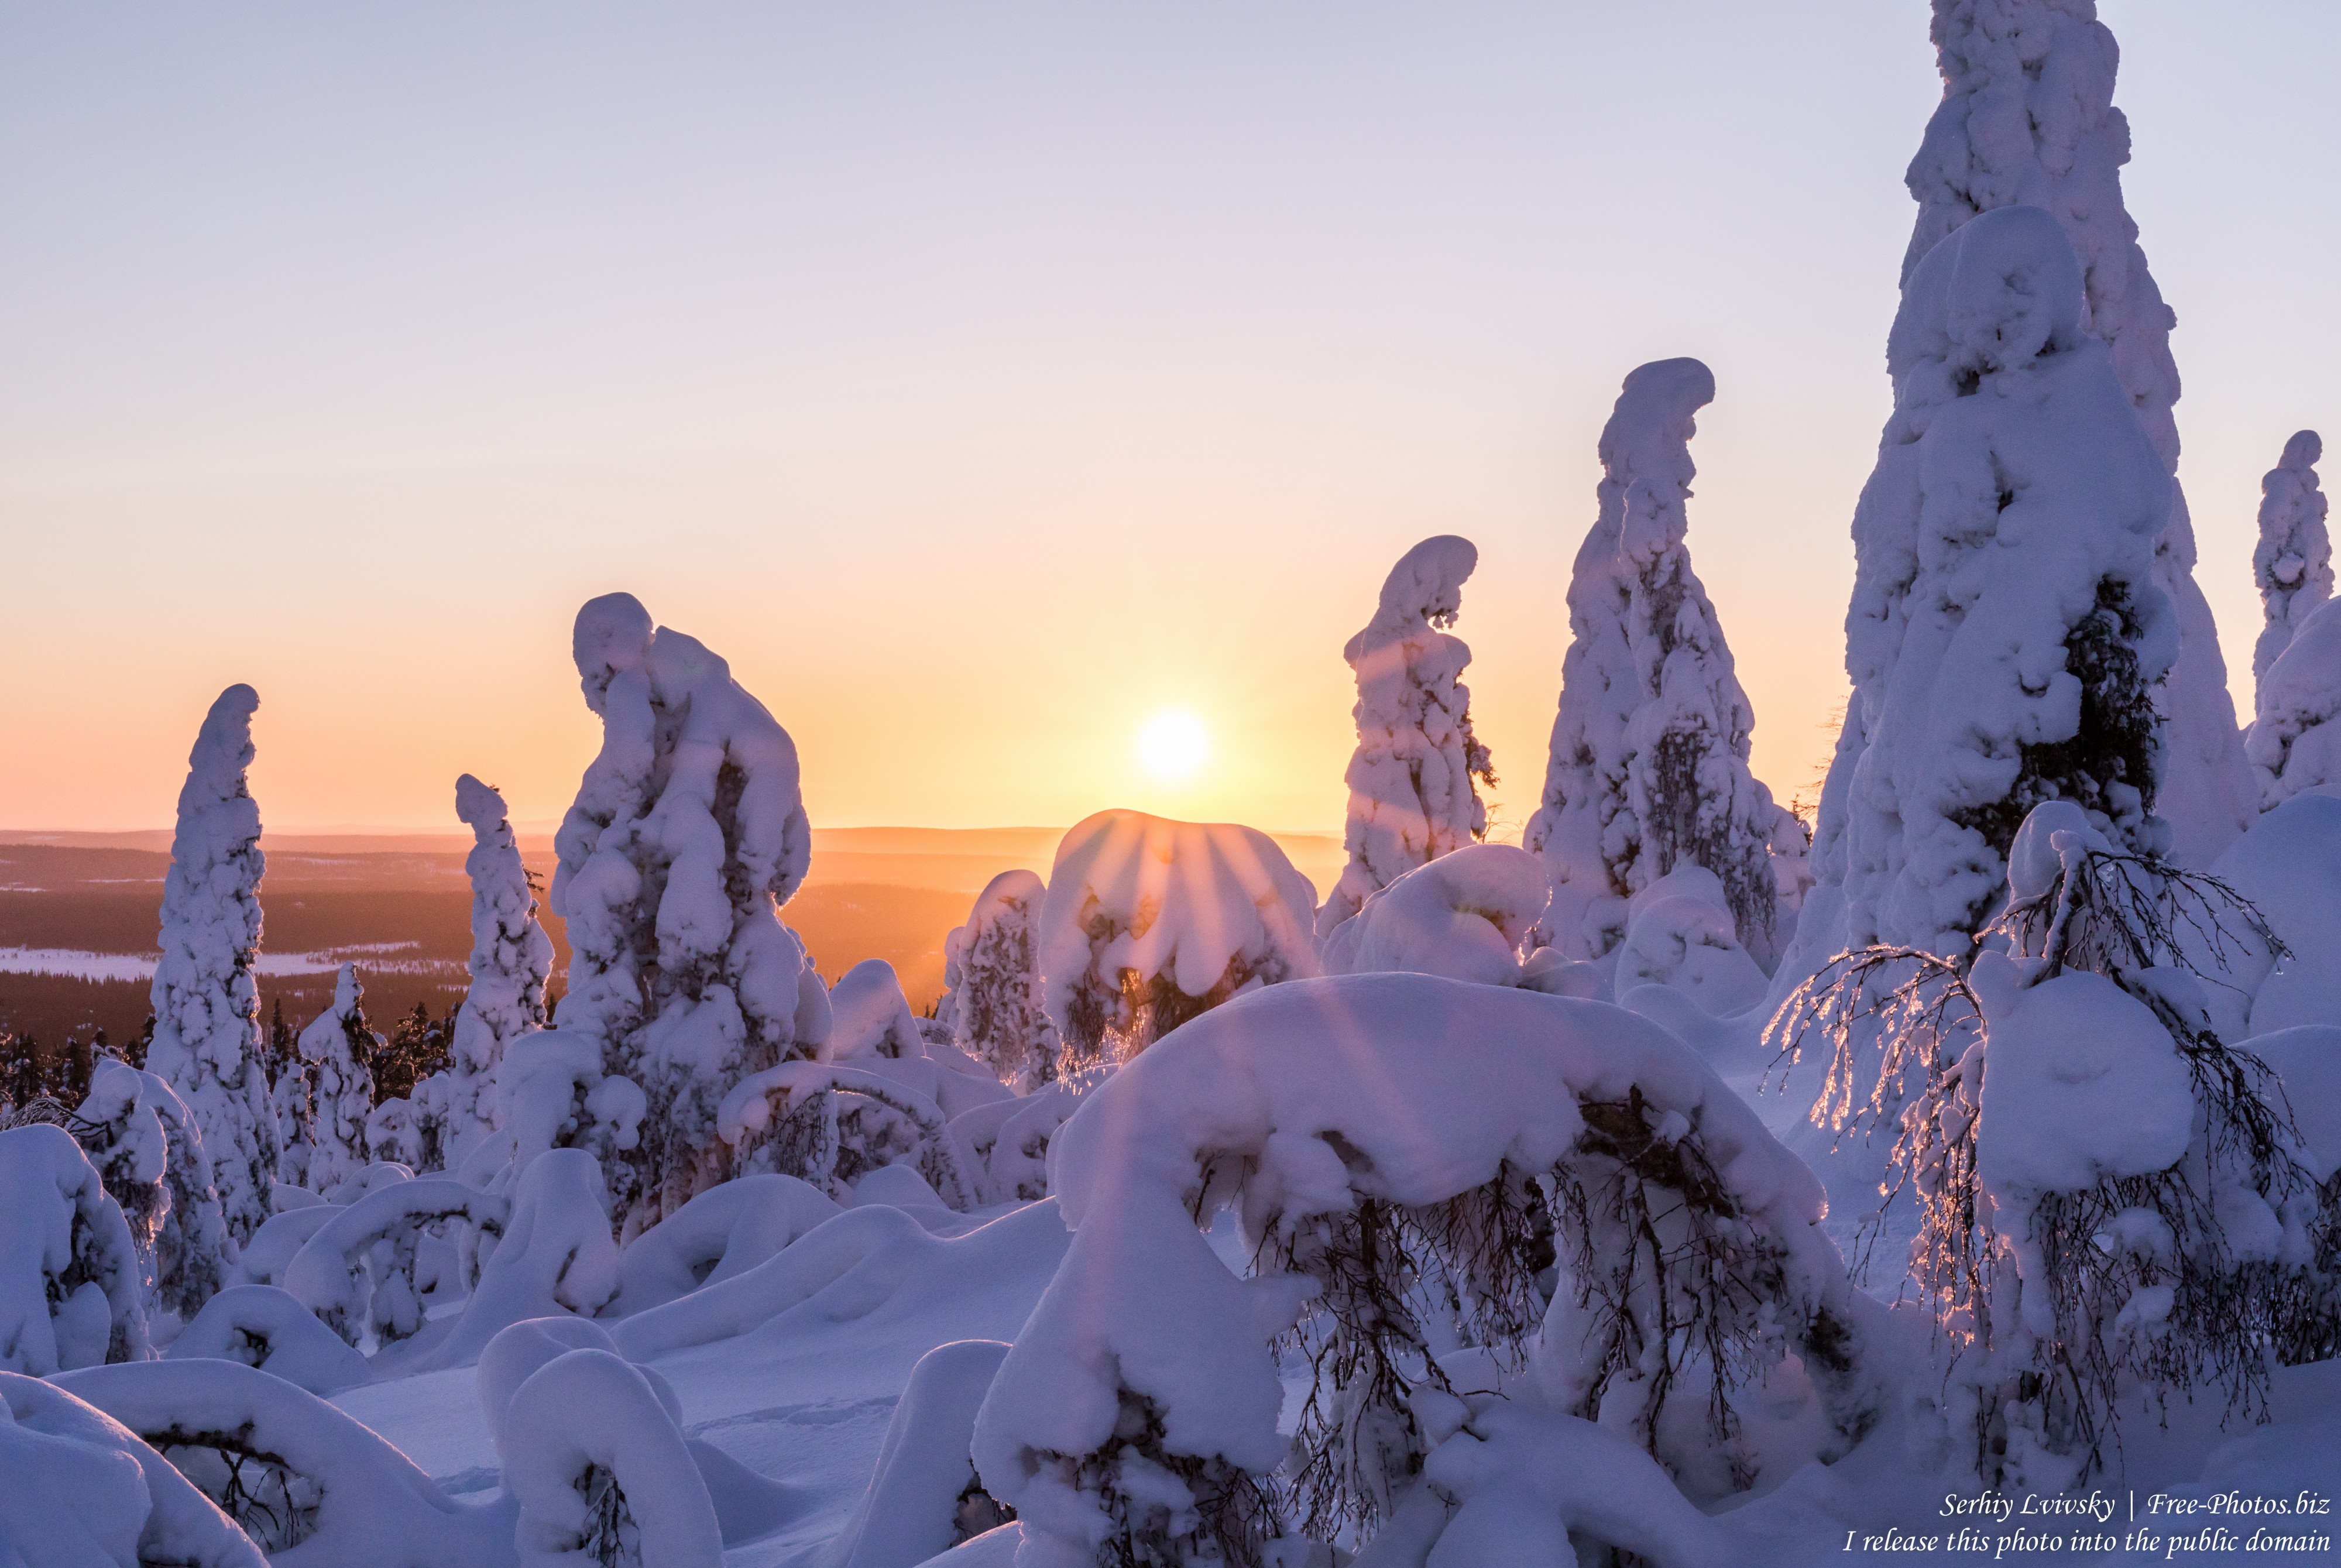 Valtavaara, Finland, photographed in January 2020 by Serhiy Lvivsky, picture 29